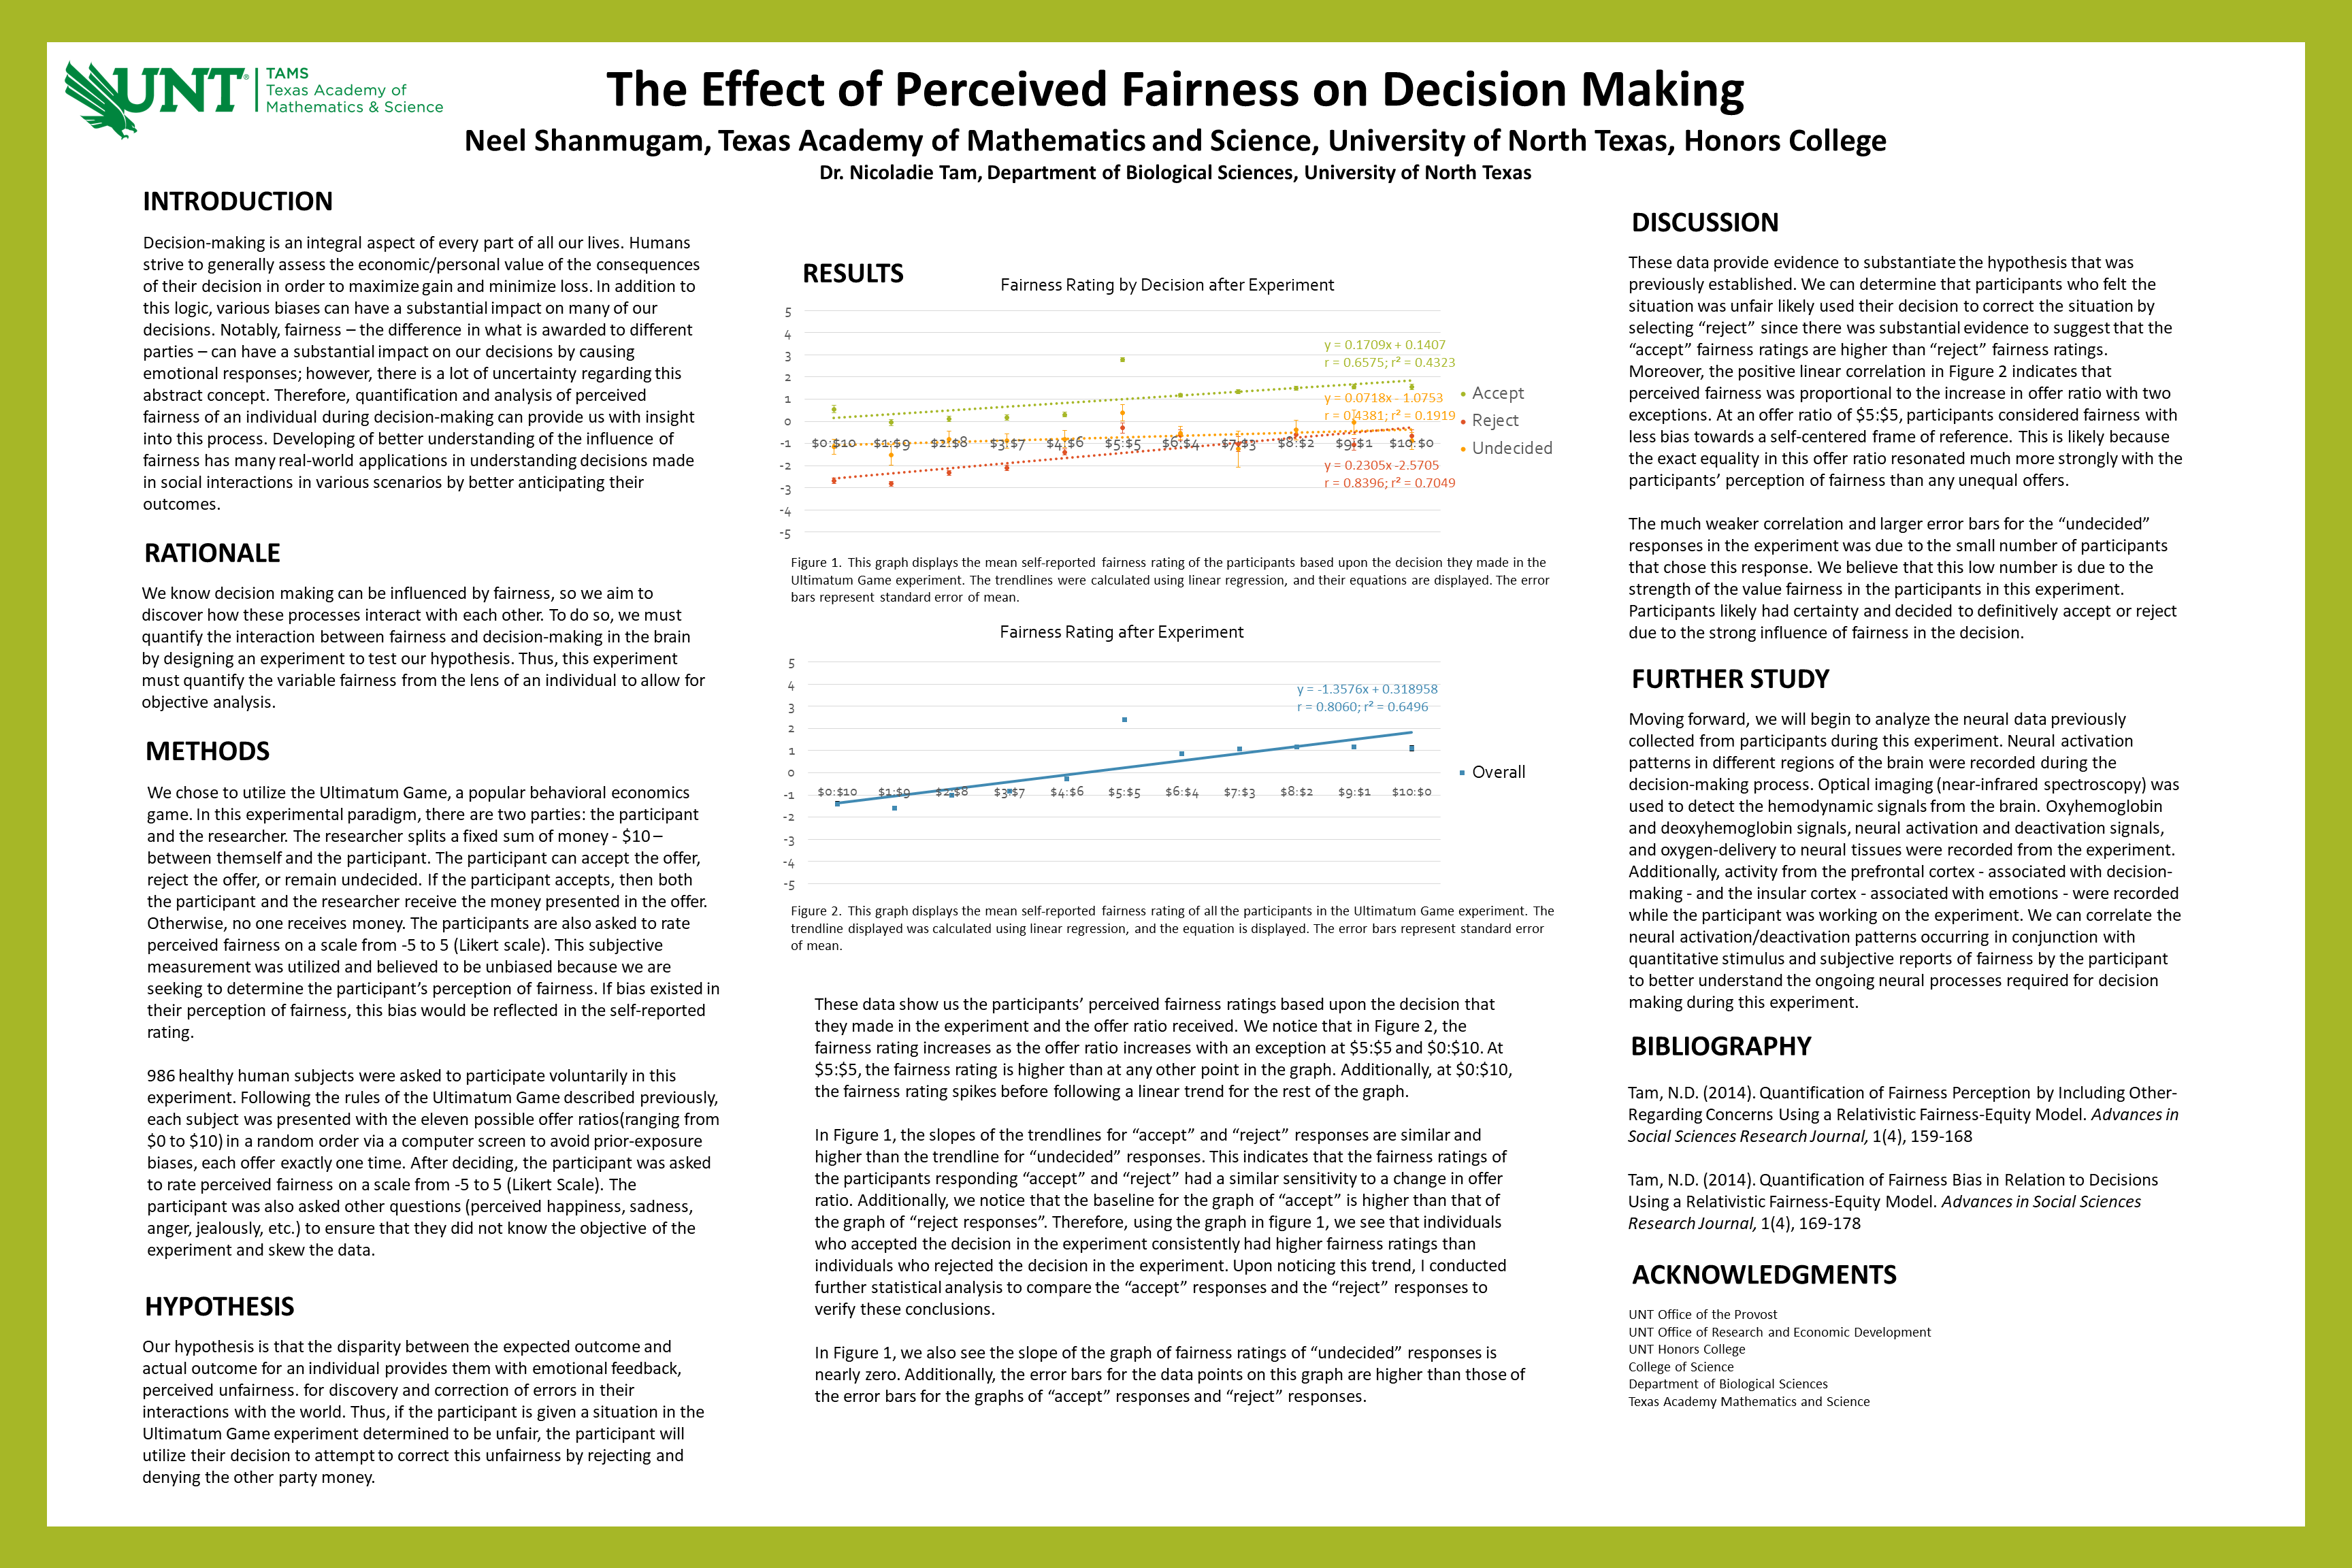 Effect of Perceived Fairness on Decision Making